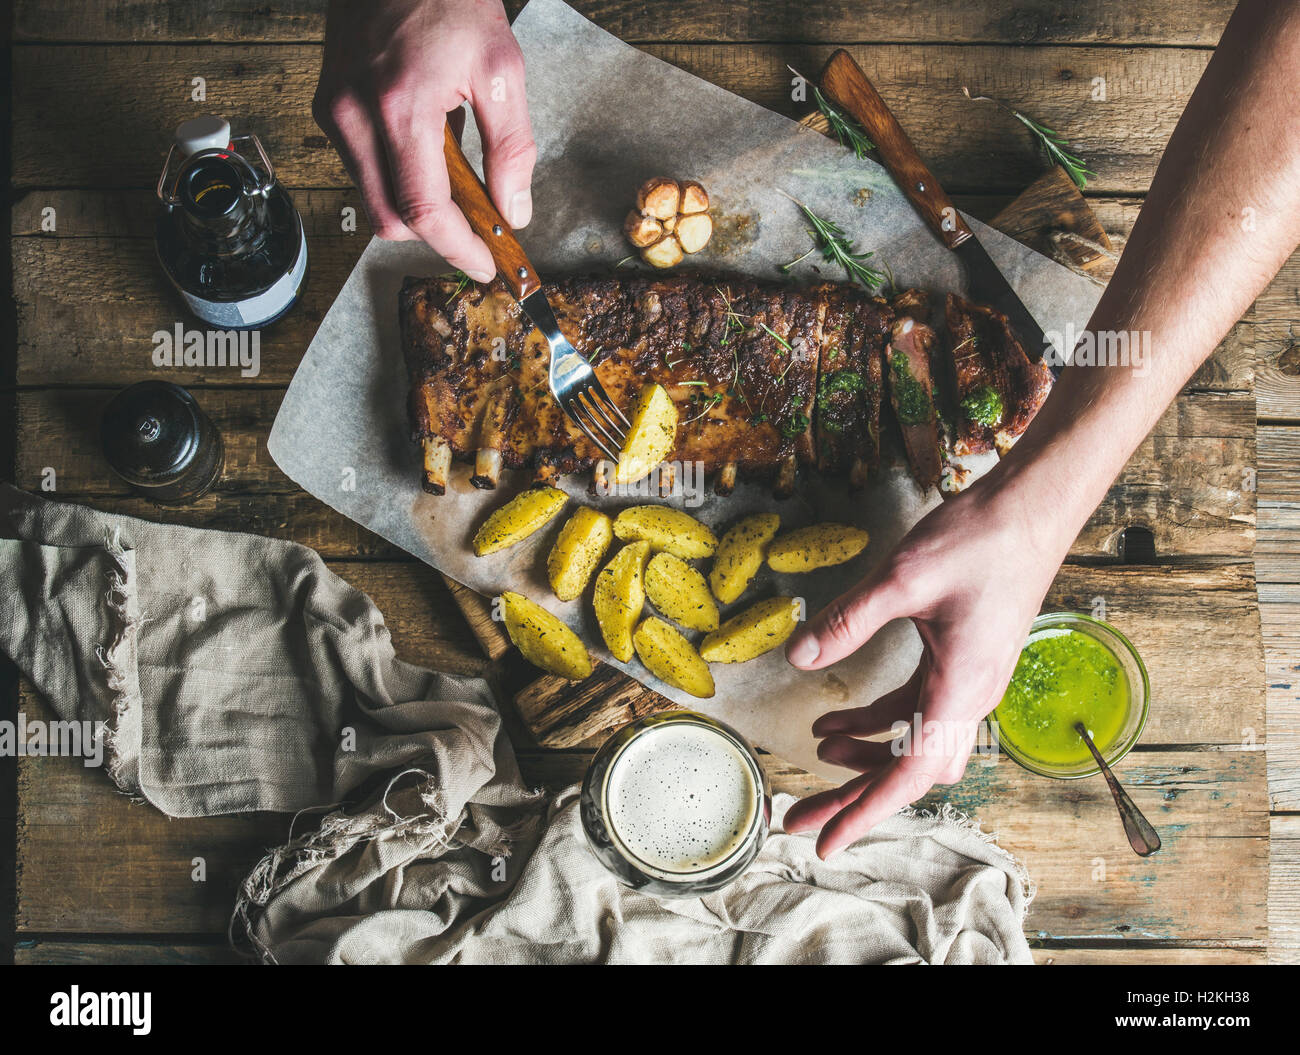 Man eating roasted pork ribs with garlic, rosemary and green herb sauce on rustic wooden table. Man' s hand holding fork with fr Stock Photo